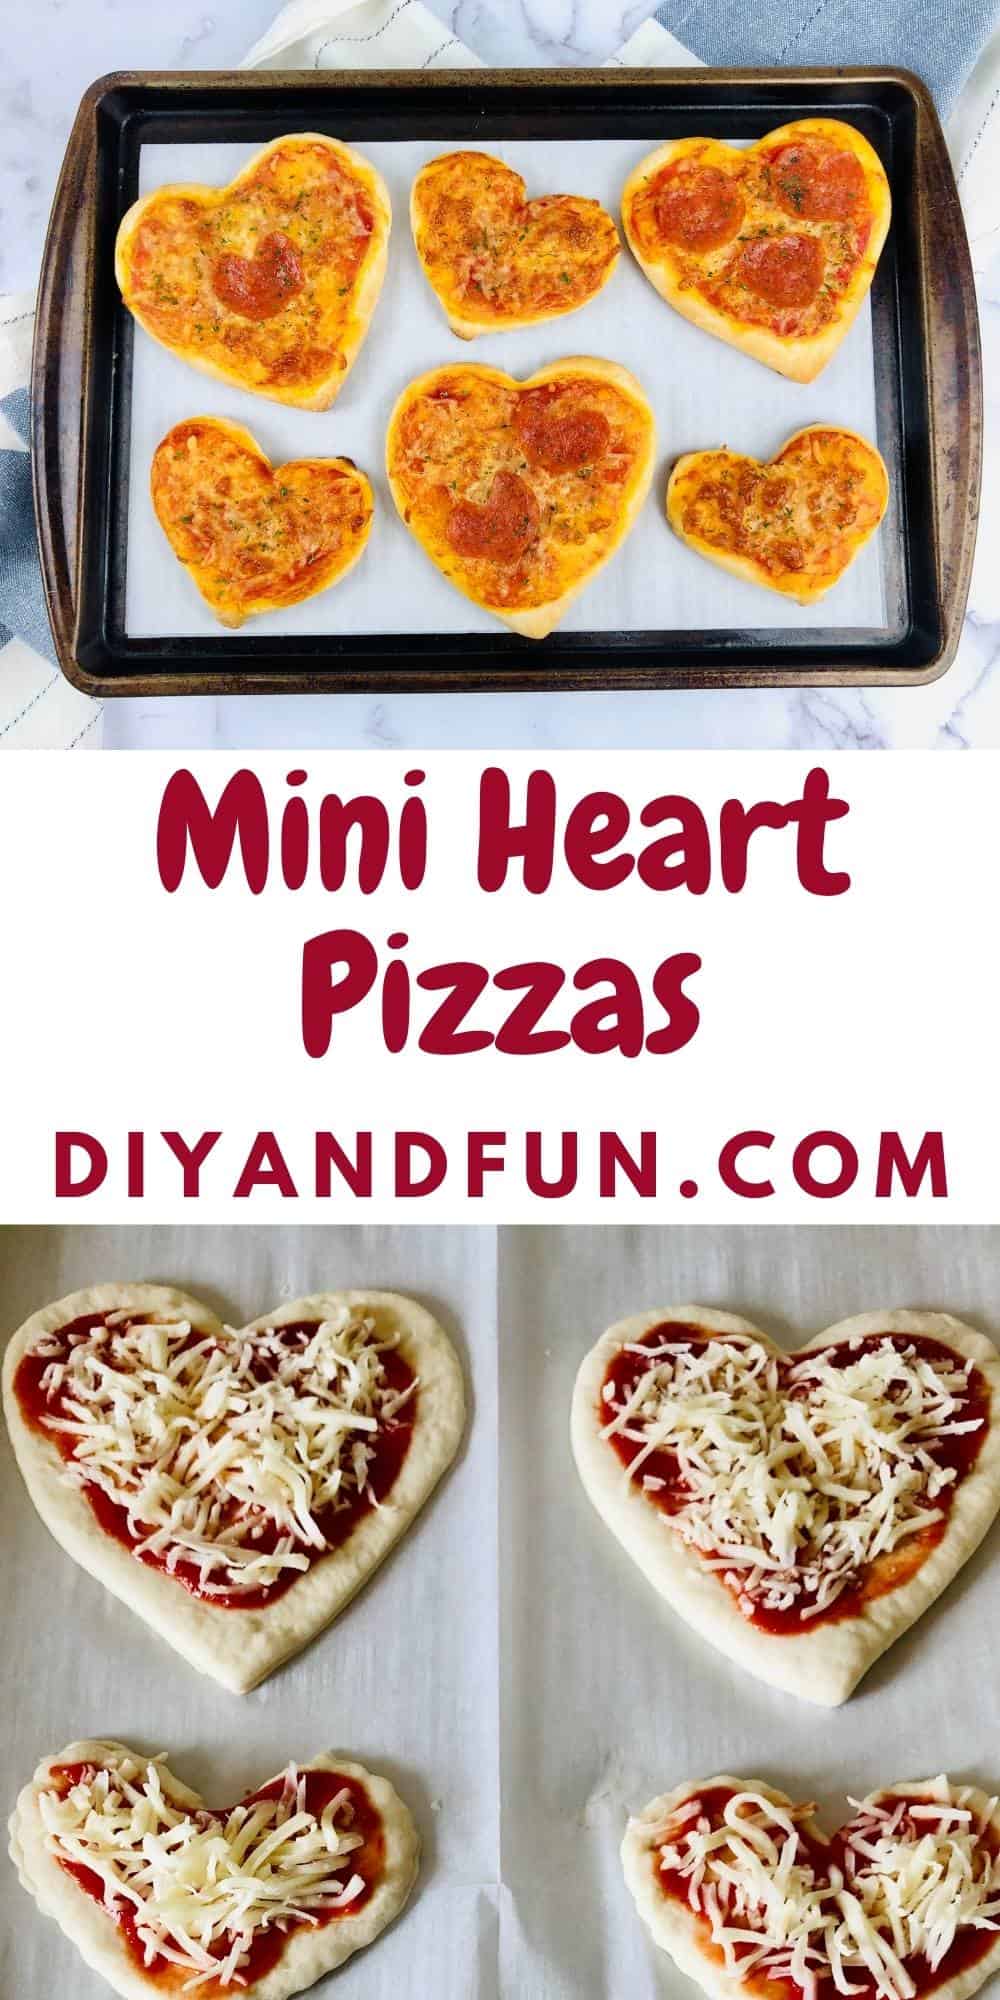 Mini Heart Shaped Pizzas, a really simple recipe idea for making a Valentines Day or romantic pizza. Low carb option.